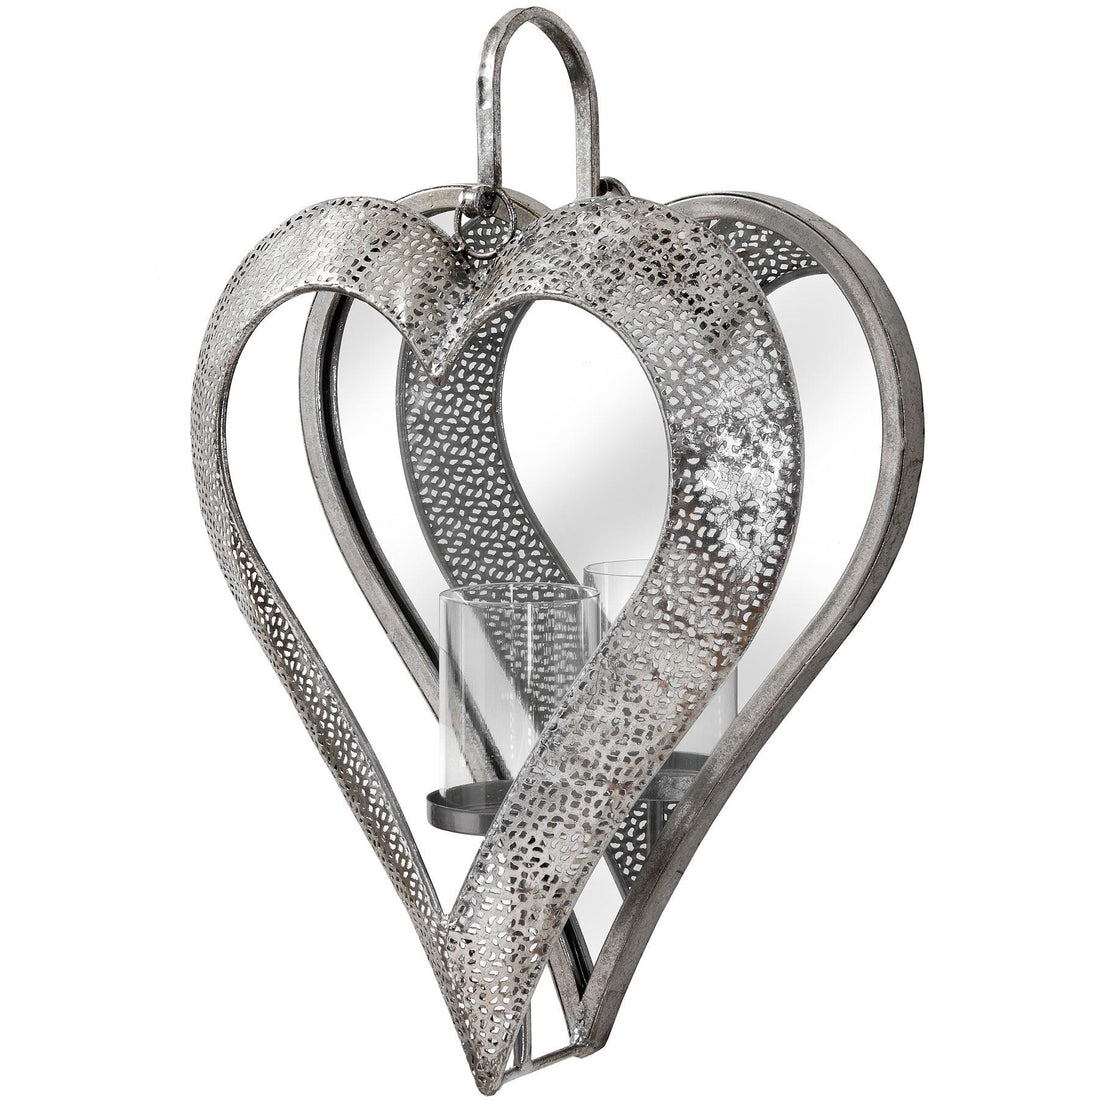 Antique Silver Heart Mirrored Tealight Holder in Large - £74.95 - Gifts & Accessories > Candle Holders > Candle Holders 